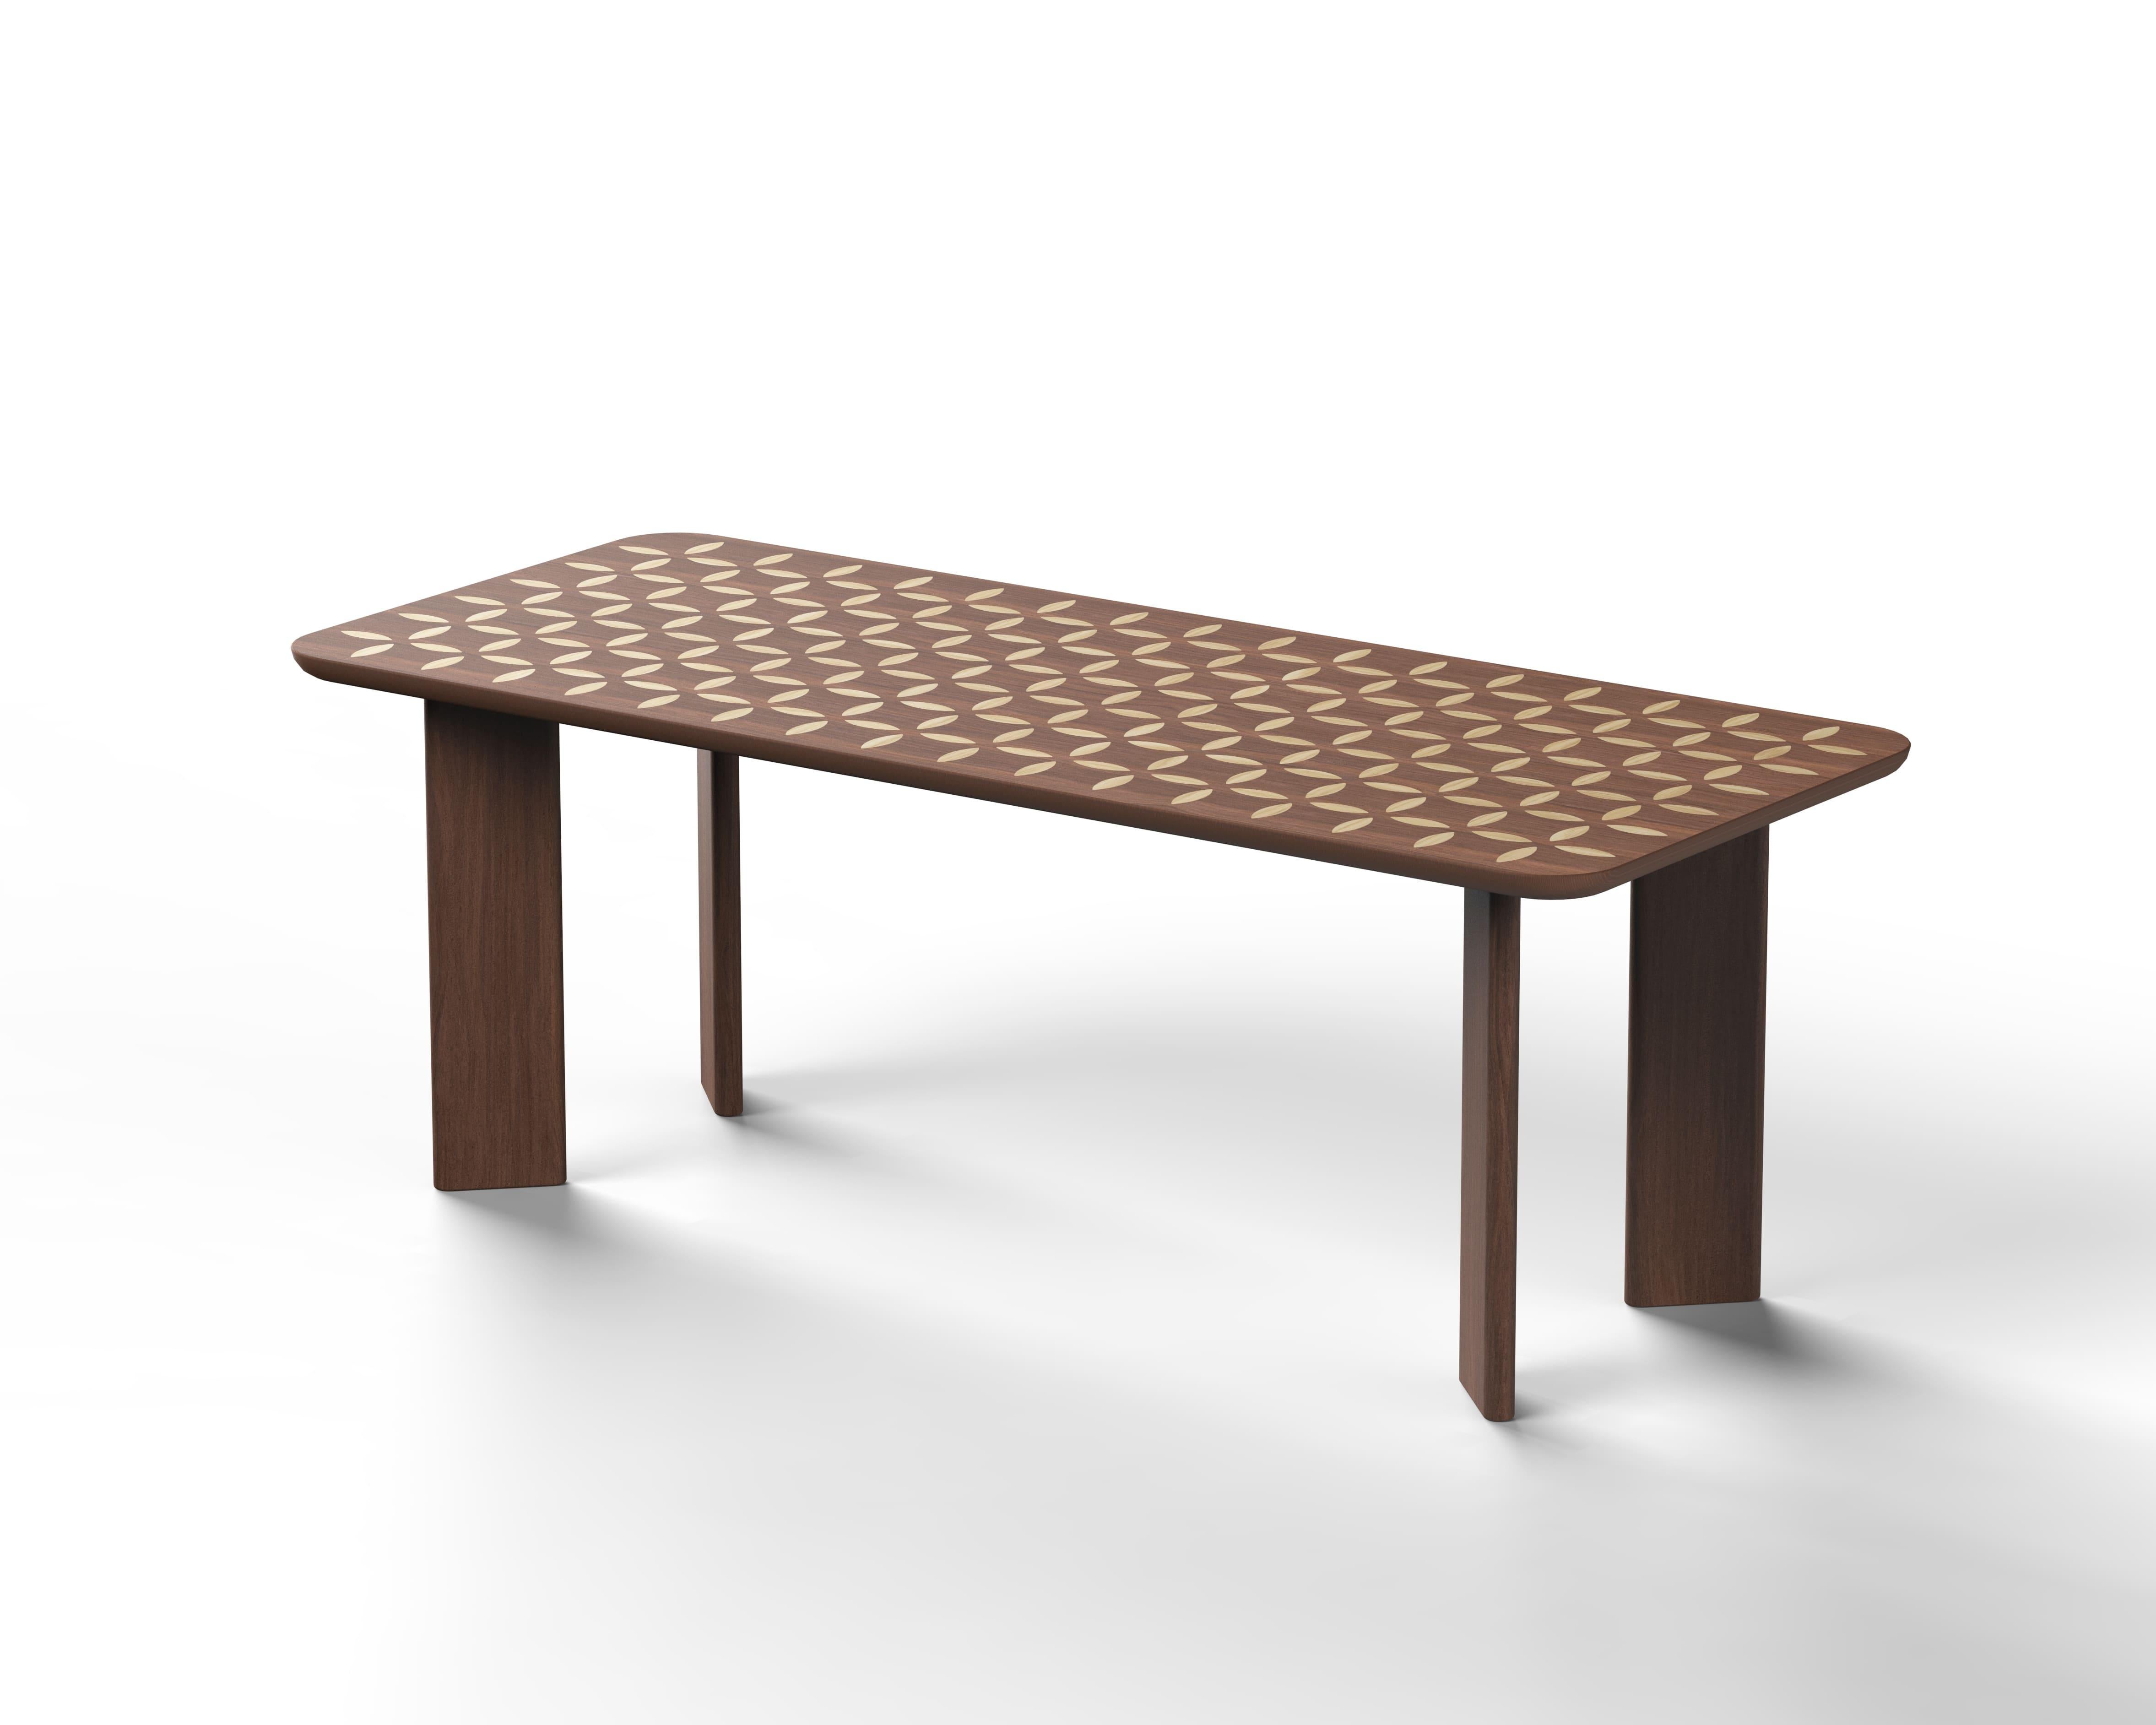 Table top made of 10/10 Canaletto walnut veneer surrounded by a perimeter band in solid Canaletto walnut. Table thickness 40 mm
Connection band in solid canaletto walnut 40x30 mm

Legs 71x18x4 cm in 10/10 Canaletto walnut veneer with edges in solid